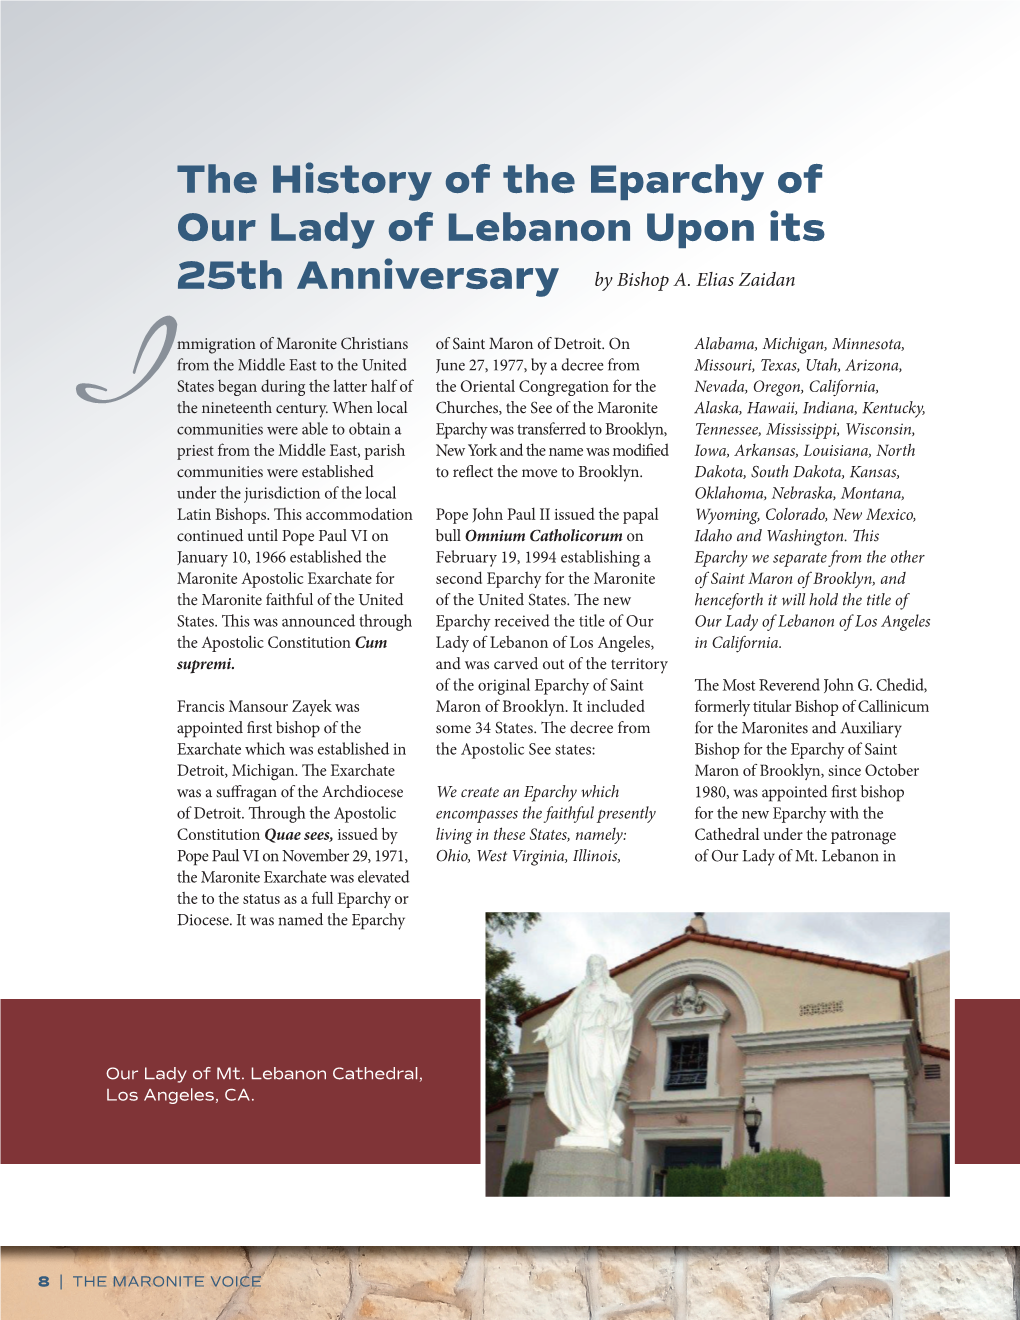 The History of the Eparchy of Our Lady of Lebanon Upon Its 25Th Anniversary by Bishop A